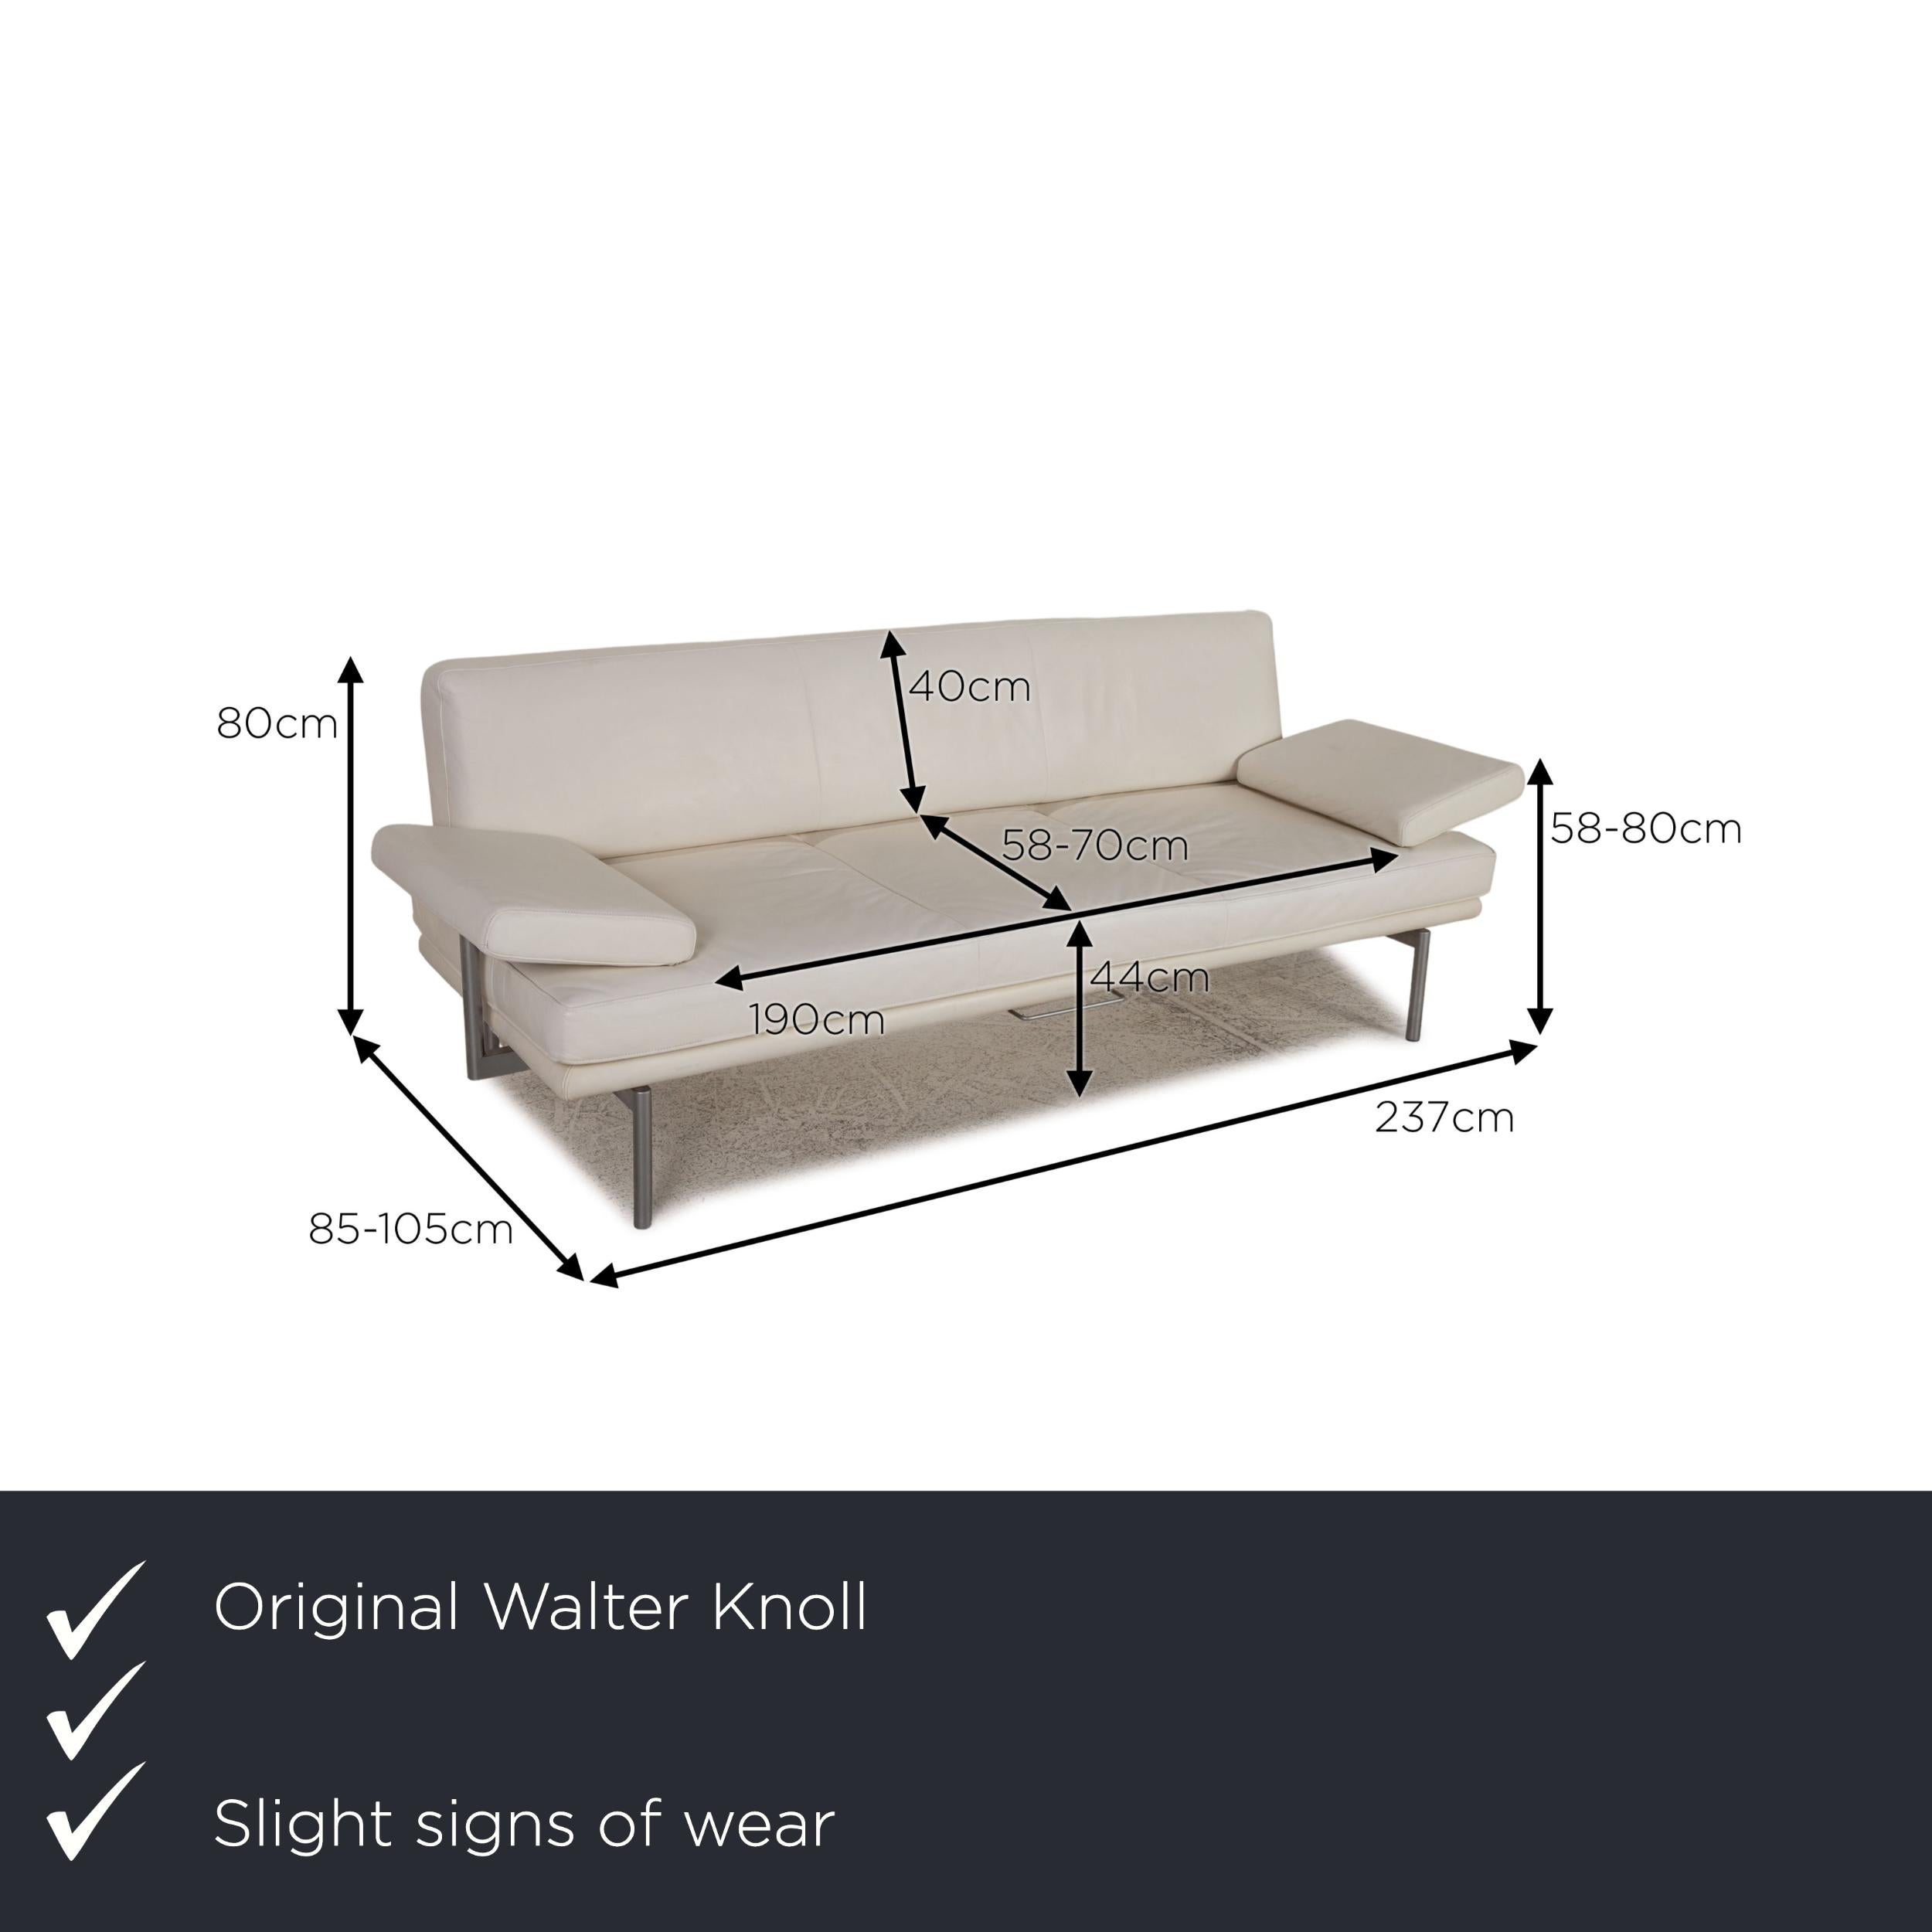 We present to you a Walter Knoll Living Platform leather sofa cream three-seater couch function.

Product measurements in centimeters:

depth: 85
width: 2237
height: 80
seat height: 44
rest height: 58
seat depth: 58
seat width: 190
back